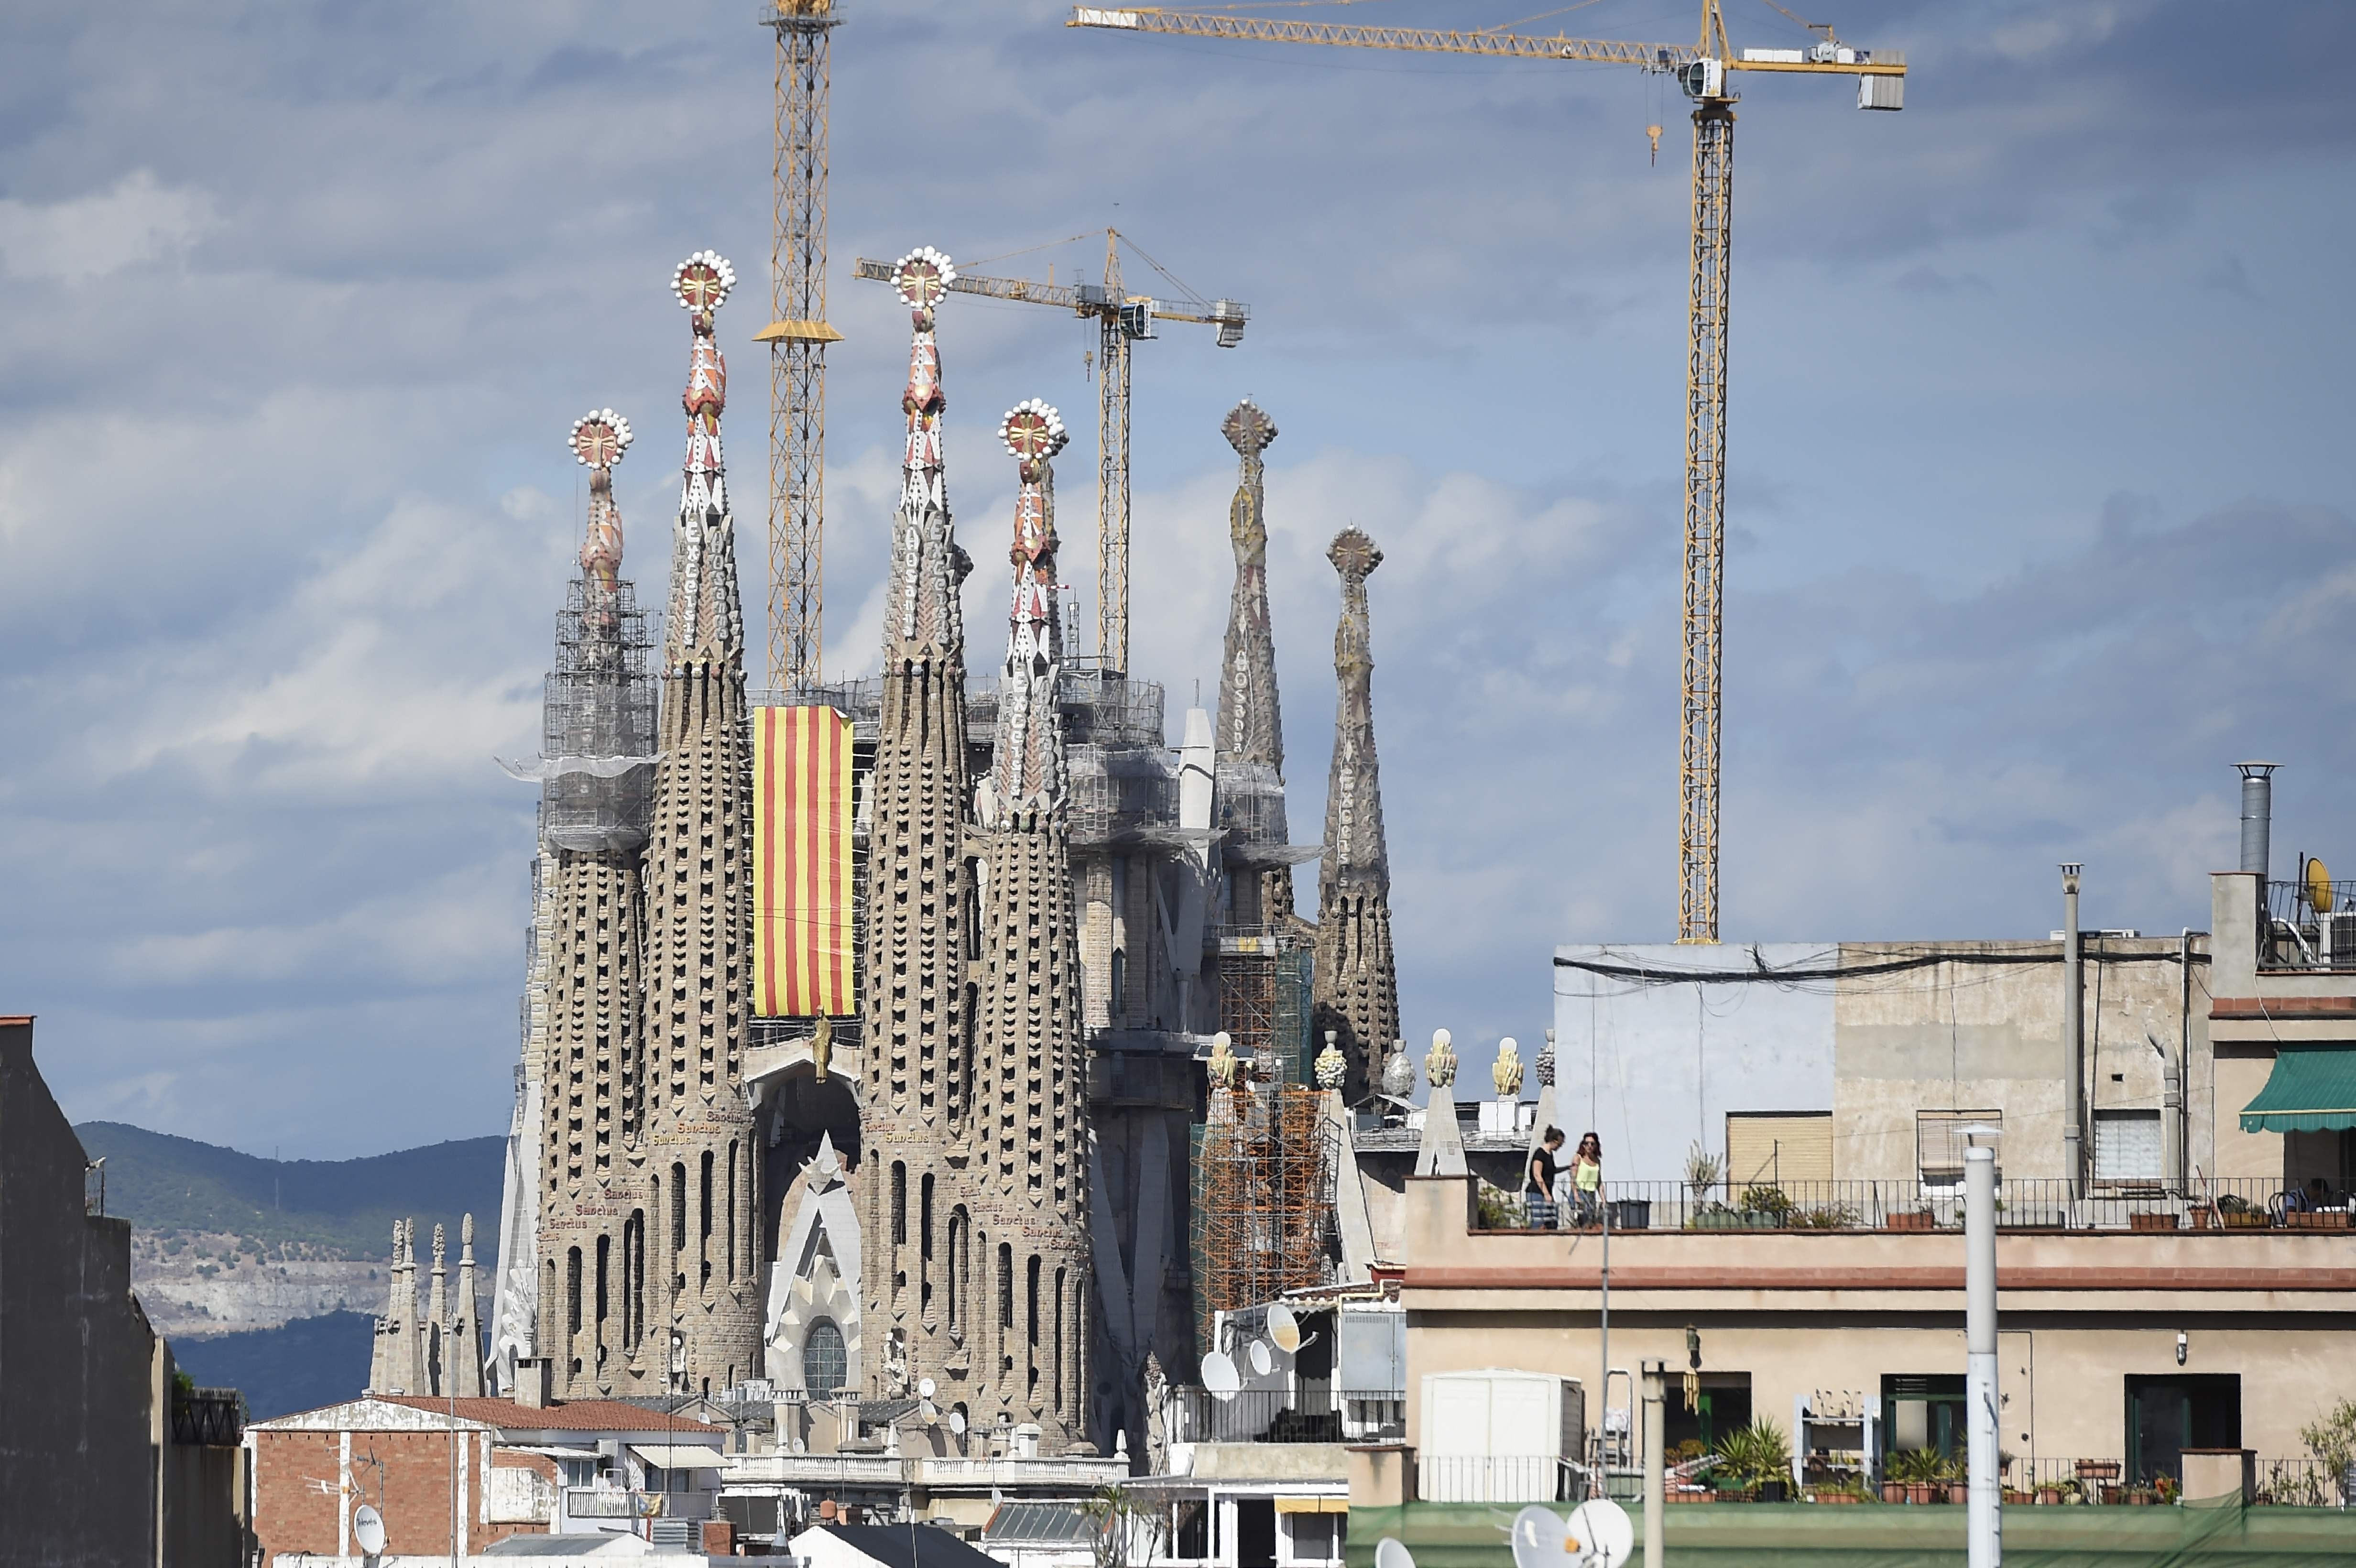 A Senyera flag (Catalan flag) hangs from the “Sagrada Familia” (Holy Family) basilica in Barcelona during the National Day of Catalonia, the “Diada.” The site was evacuated on Tuesday, September 12, because of an anti-terror operation. Photo: AFP